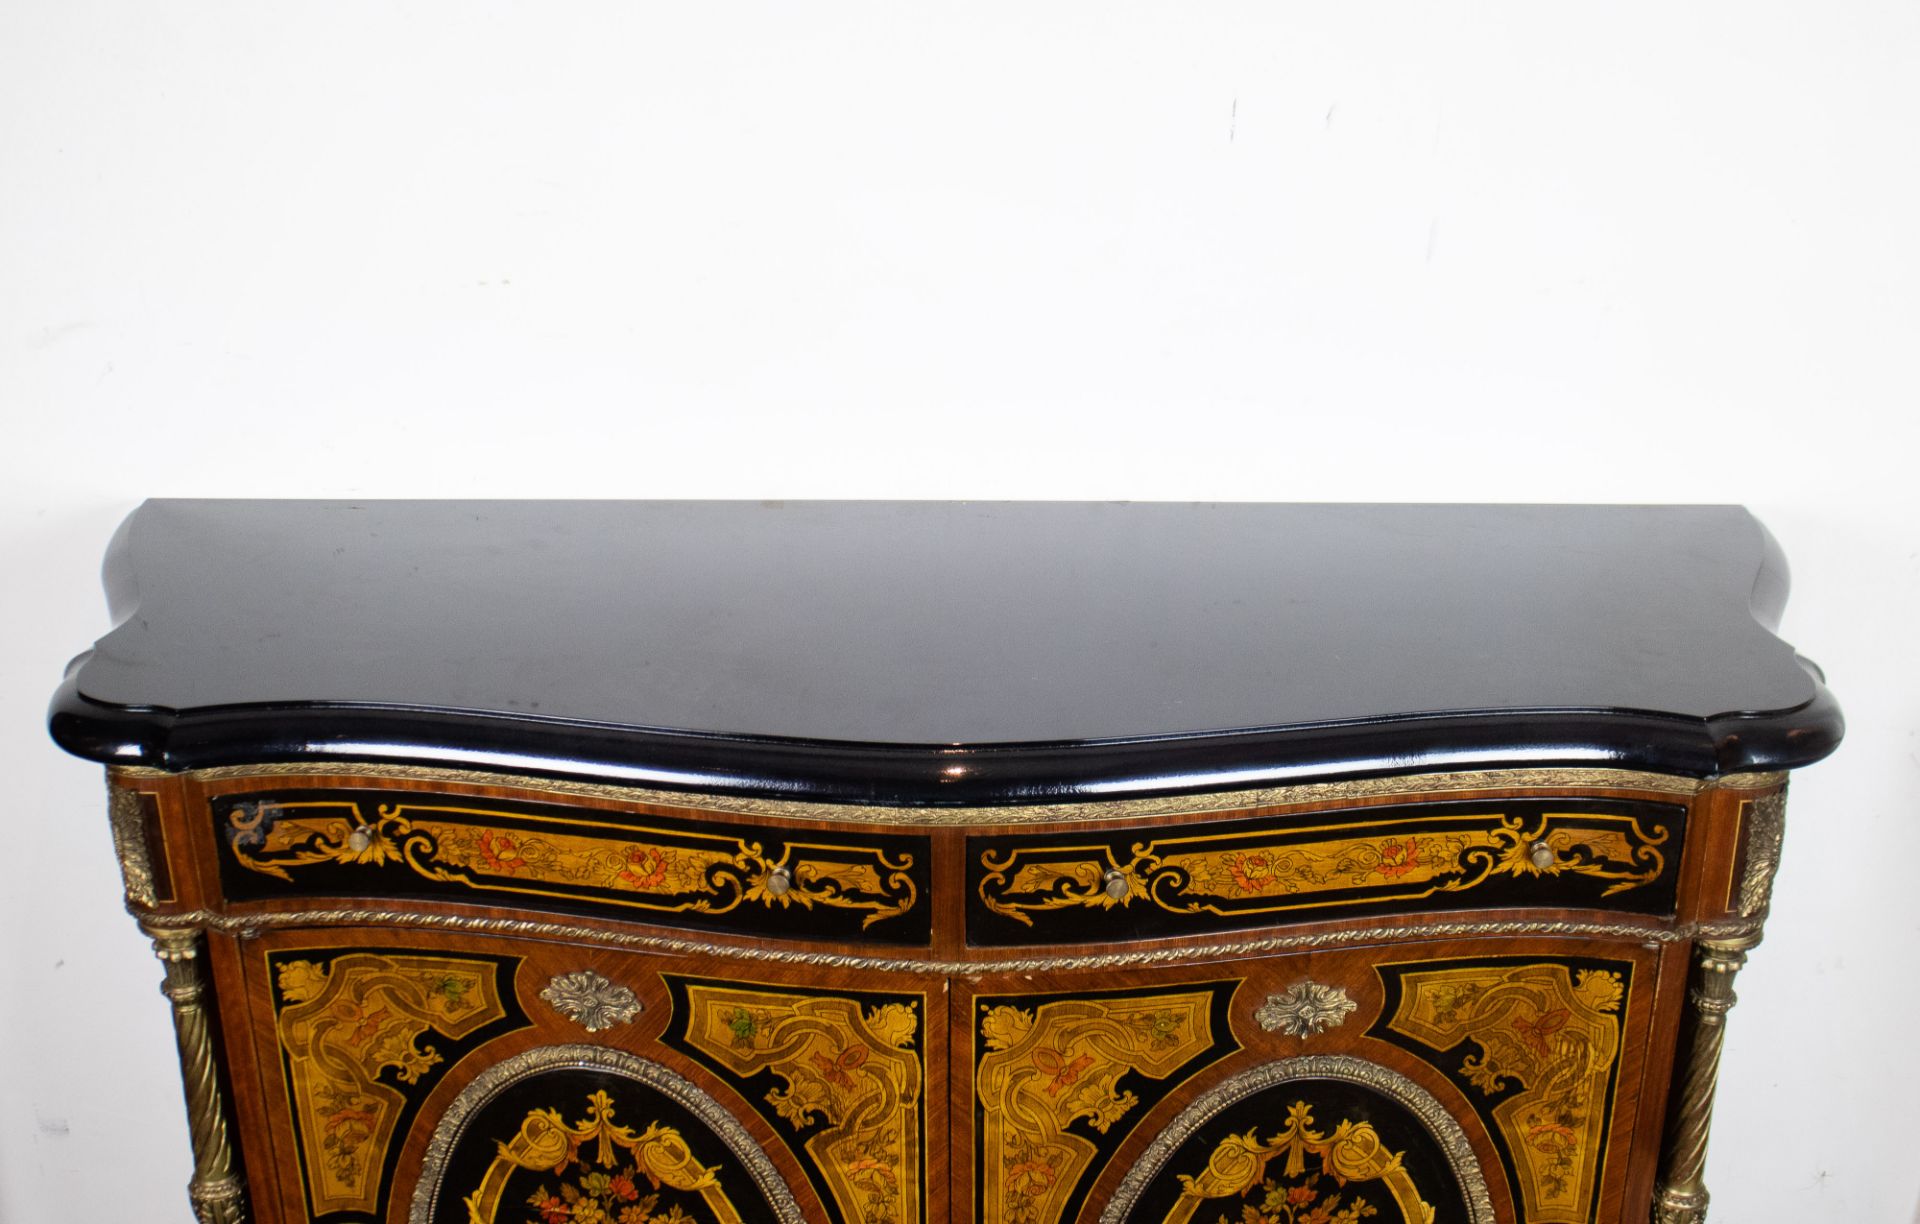 Cabinet with bronze mounts and a wooden top - Image 3 of 4